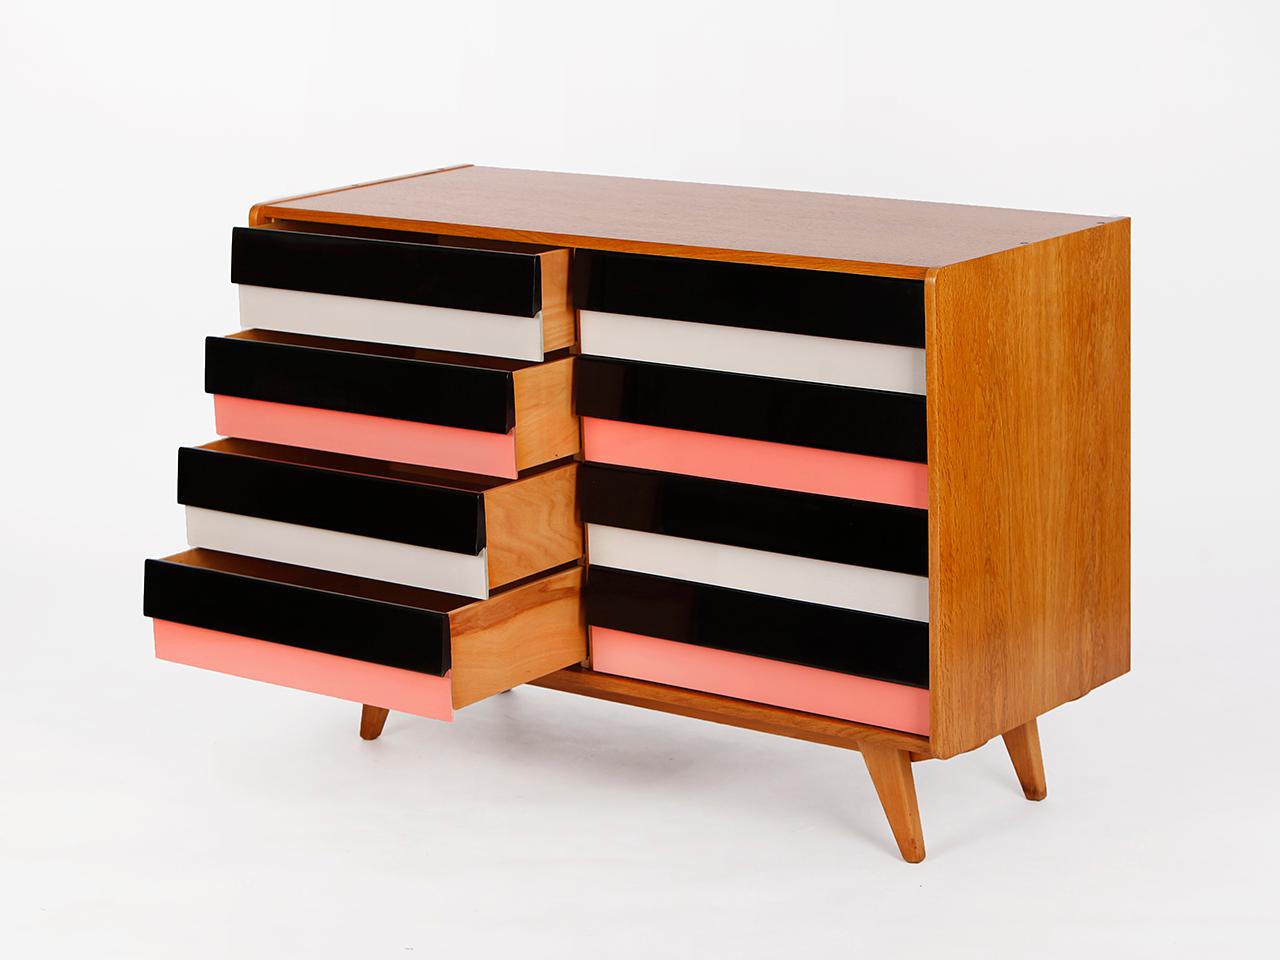 This model U-453 sideboard was designed by Jiri Jiroutek for Interior Praha in former Czechoslovakia. Produced in the 1960s.
Completely restored. Excellent condition. It is an early model with wooden drawers.